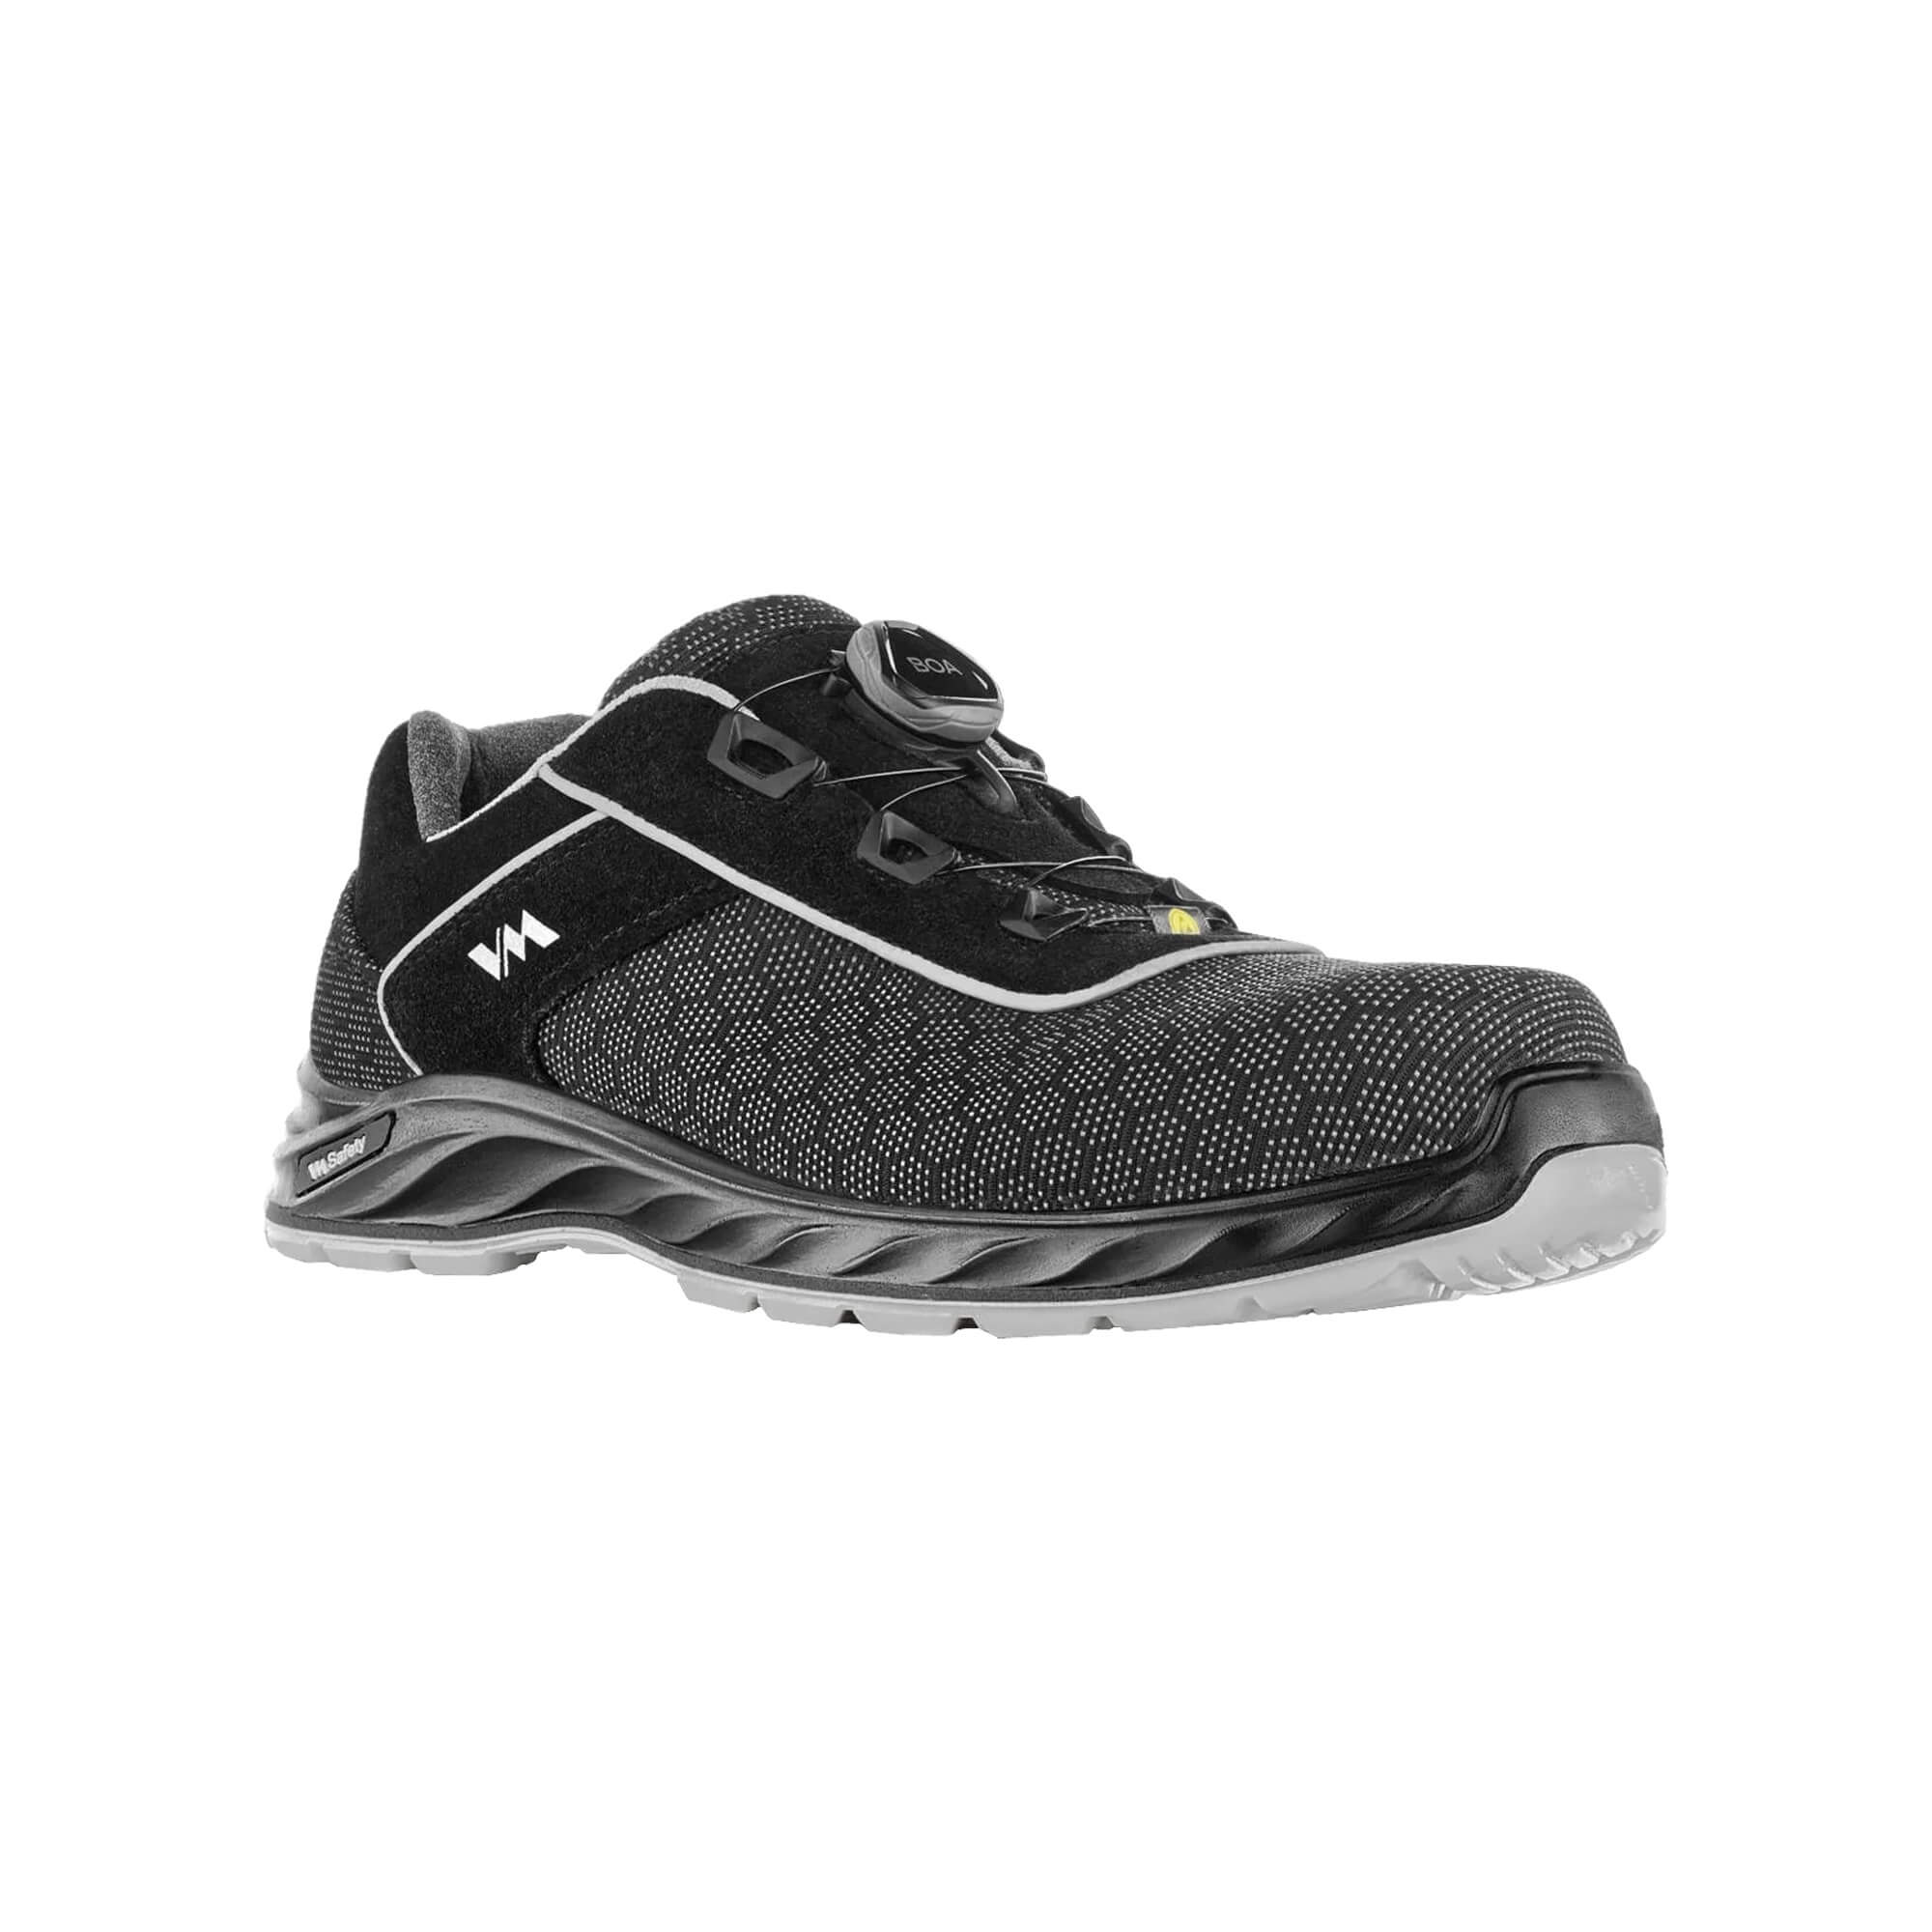 Minneapolis low cut safety shoes BOA